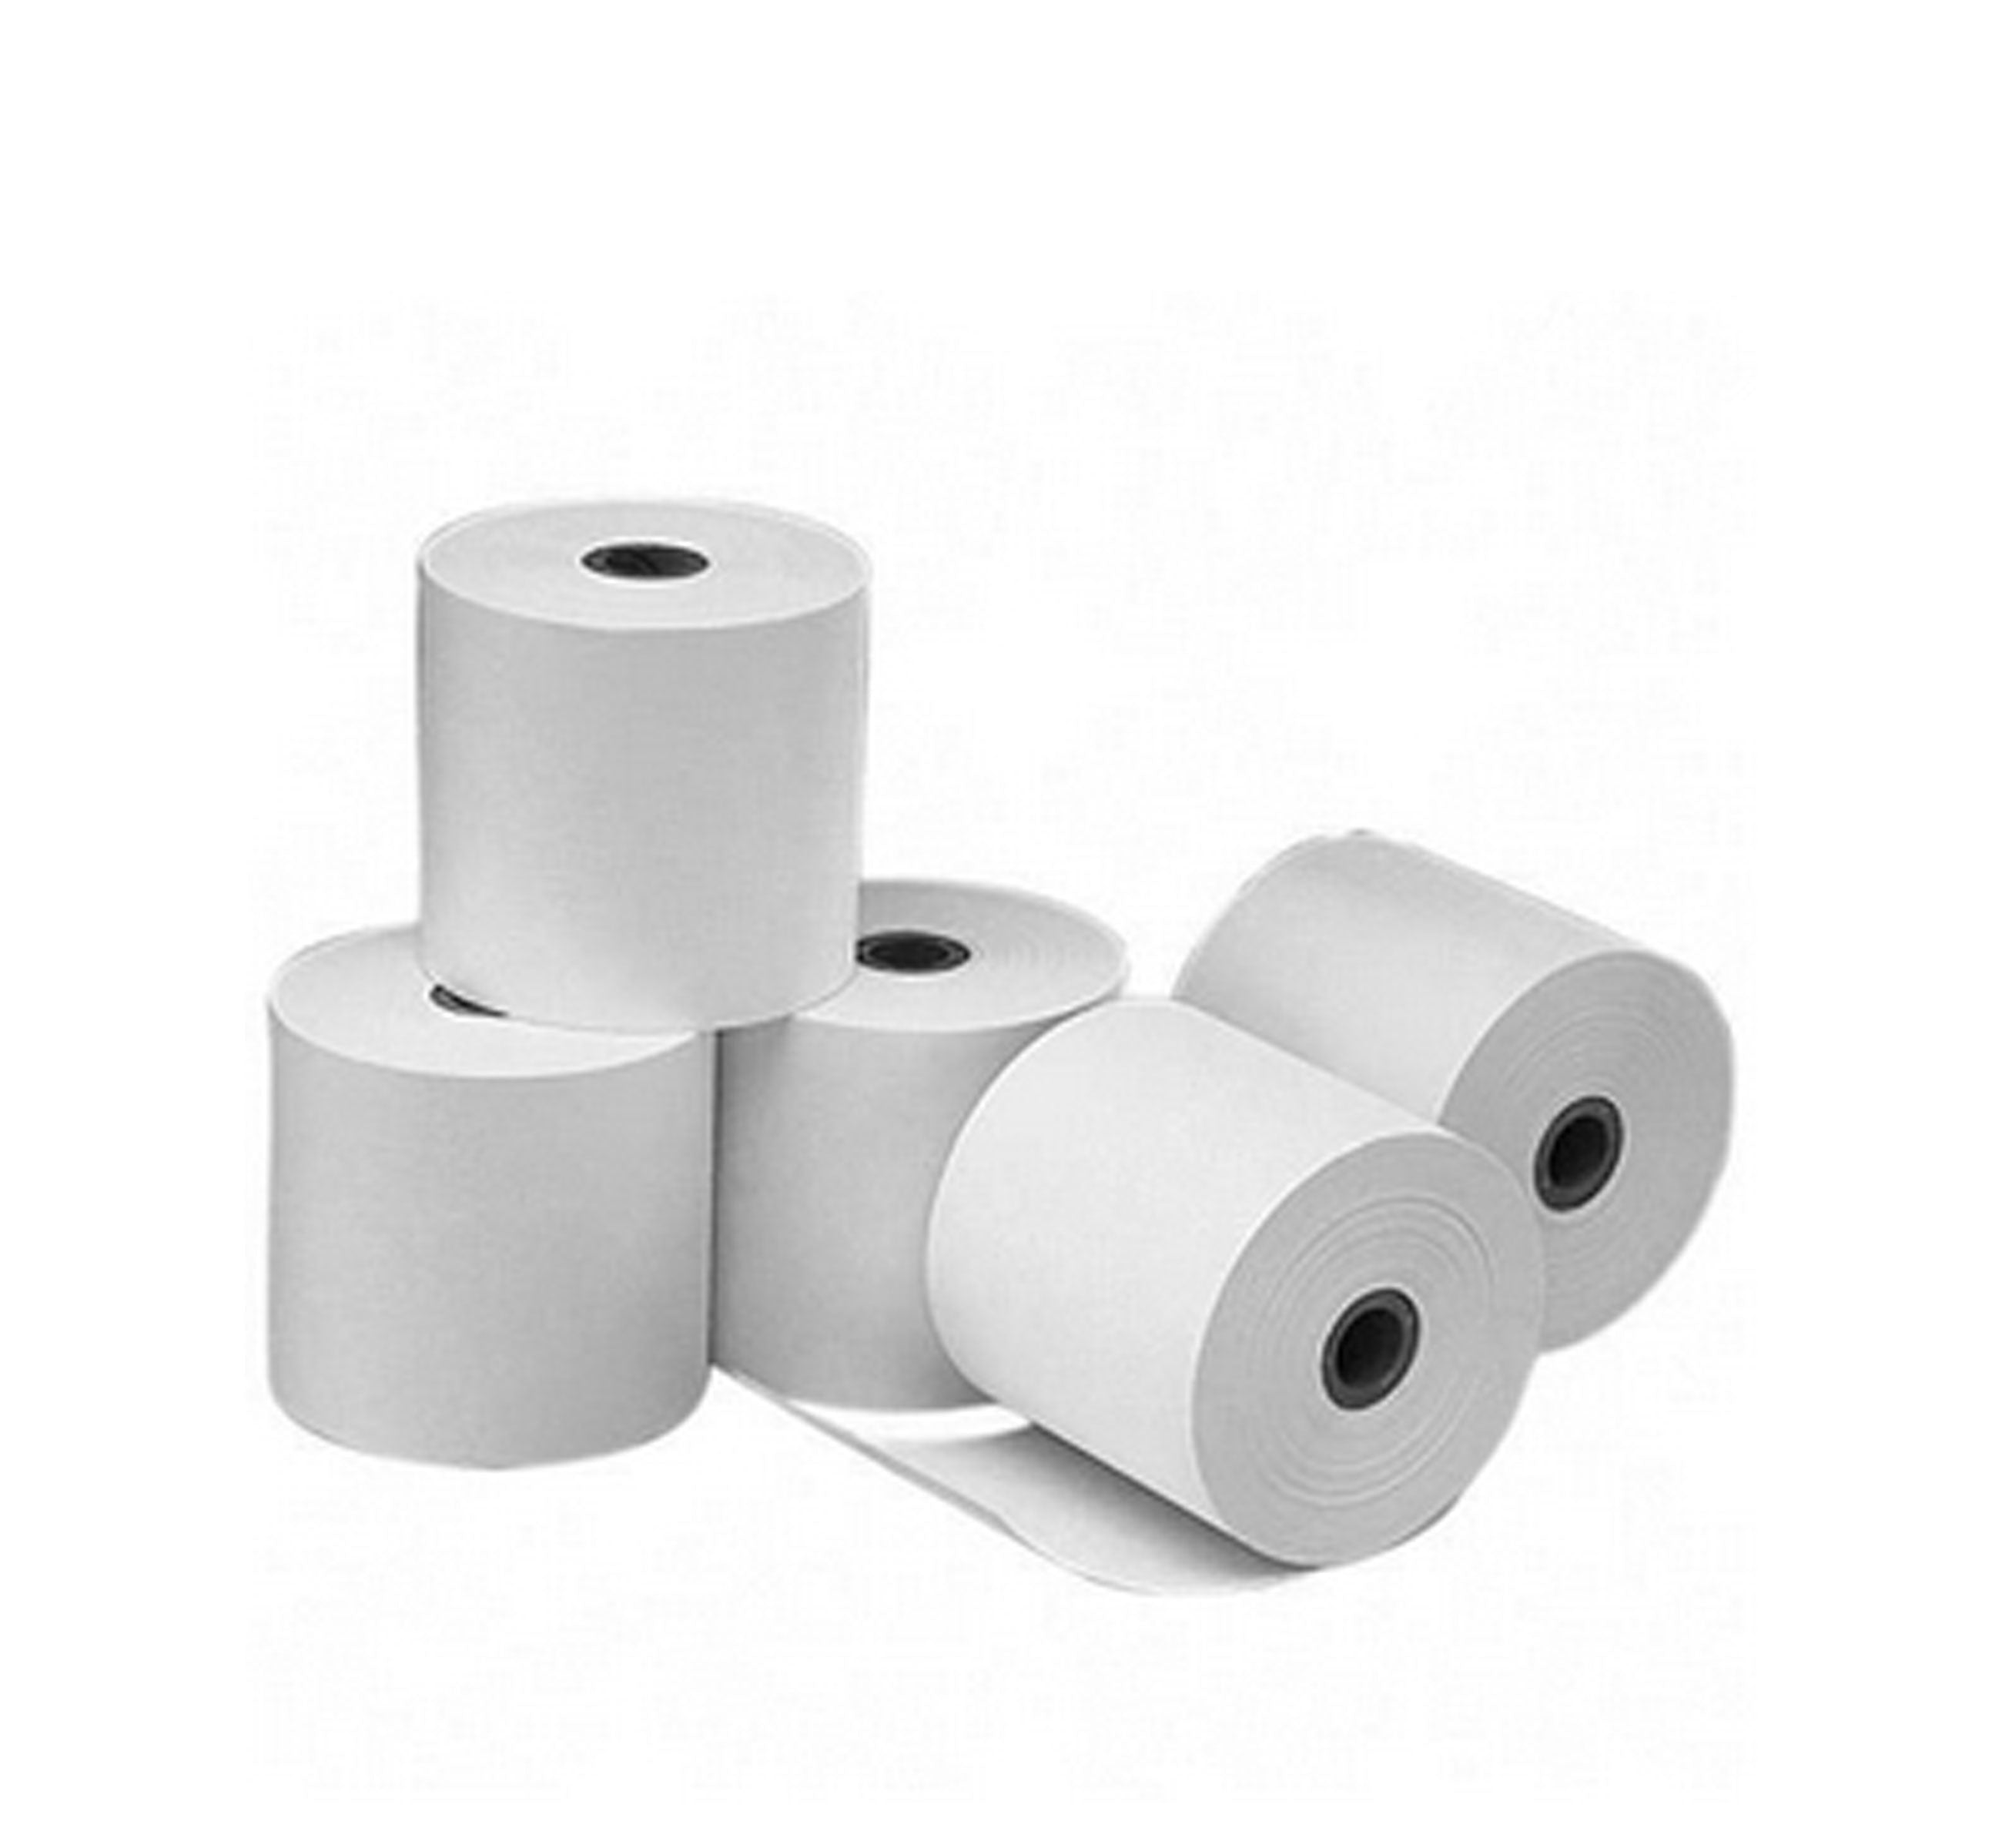 Thermal Receipt Paper (Case of 50)